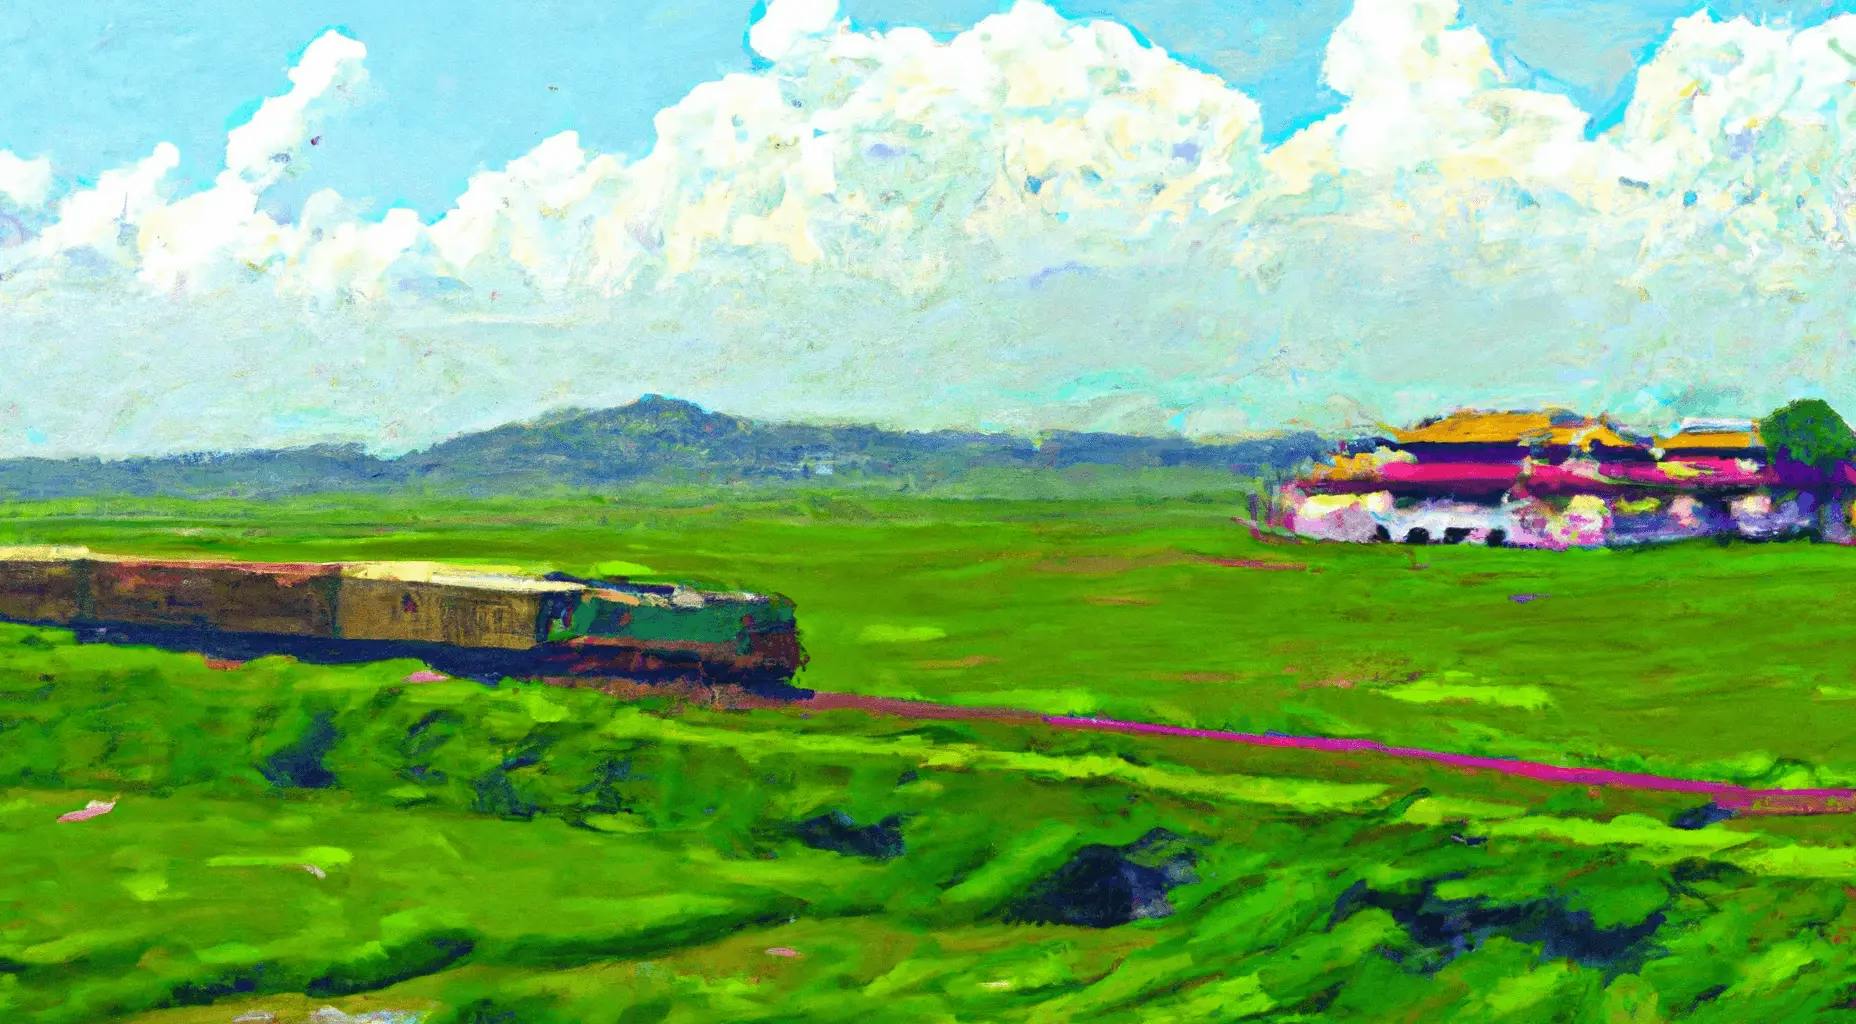 A train in the lush green lands of Vietnam. On the right there is a the Imperial Citadel of Hue. The image is drawn in a Van Gogh Style Image generated with DALL E AI.